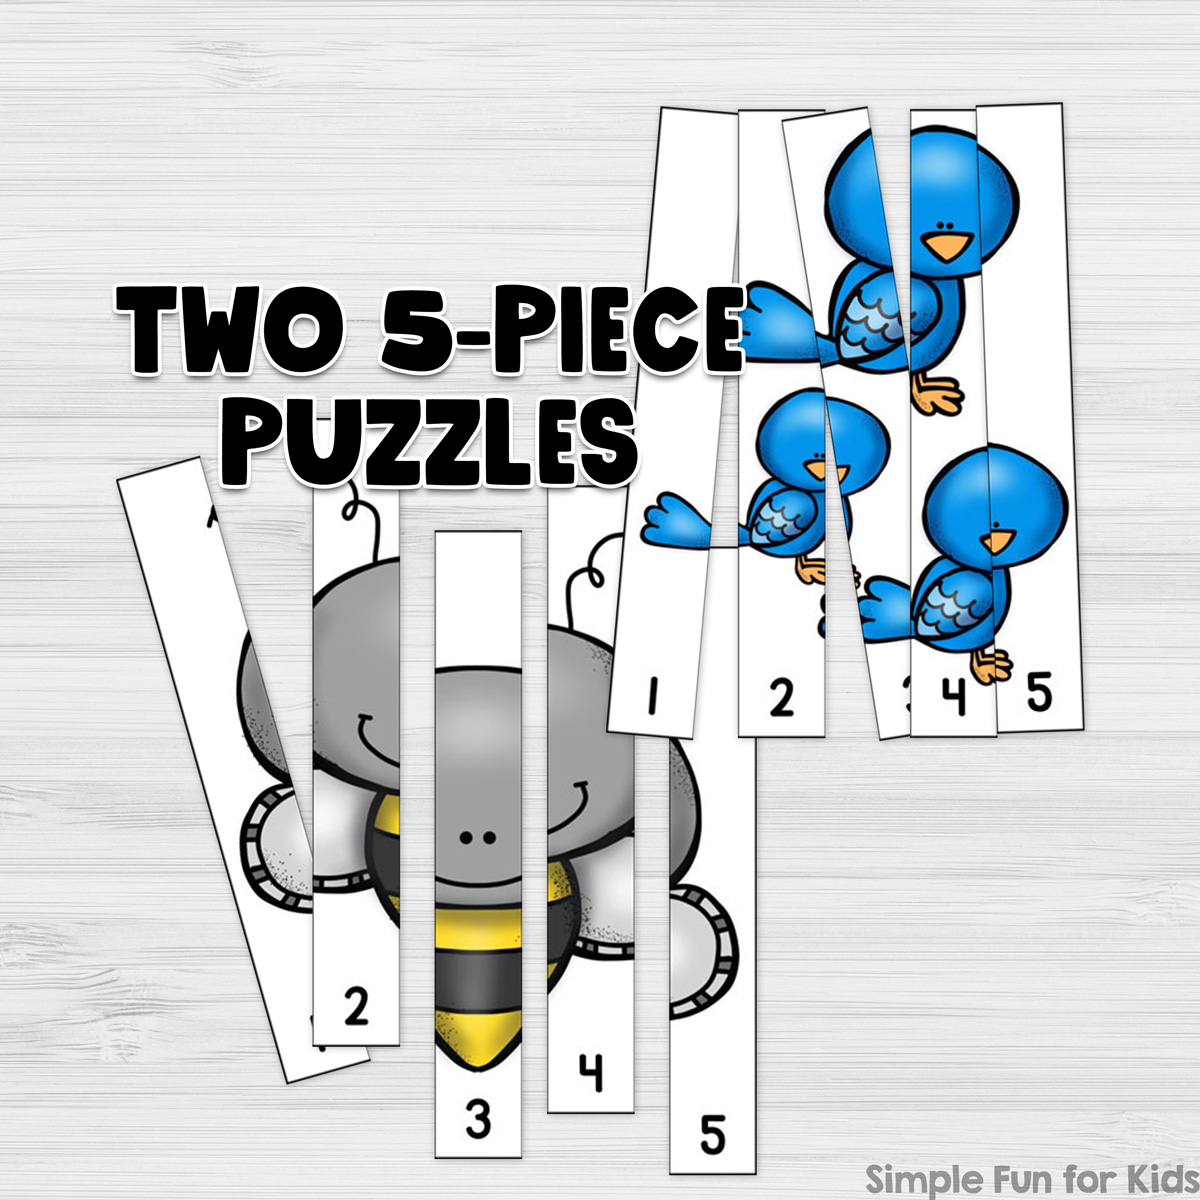 Two 5-piece puzzles showing a bee and three birds respectively. Both puzzles are on top of a white desktop. The words "Two 5-Piece Puzzles" in black are overlayed on the image.